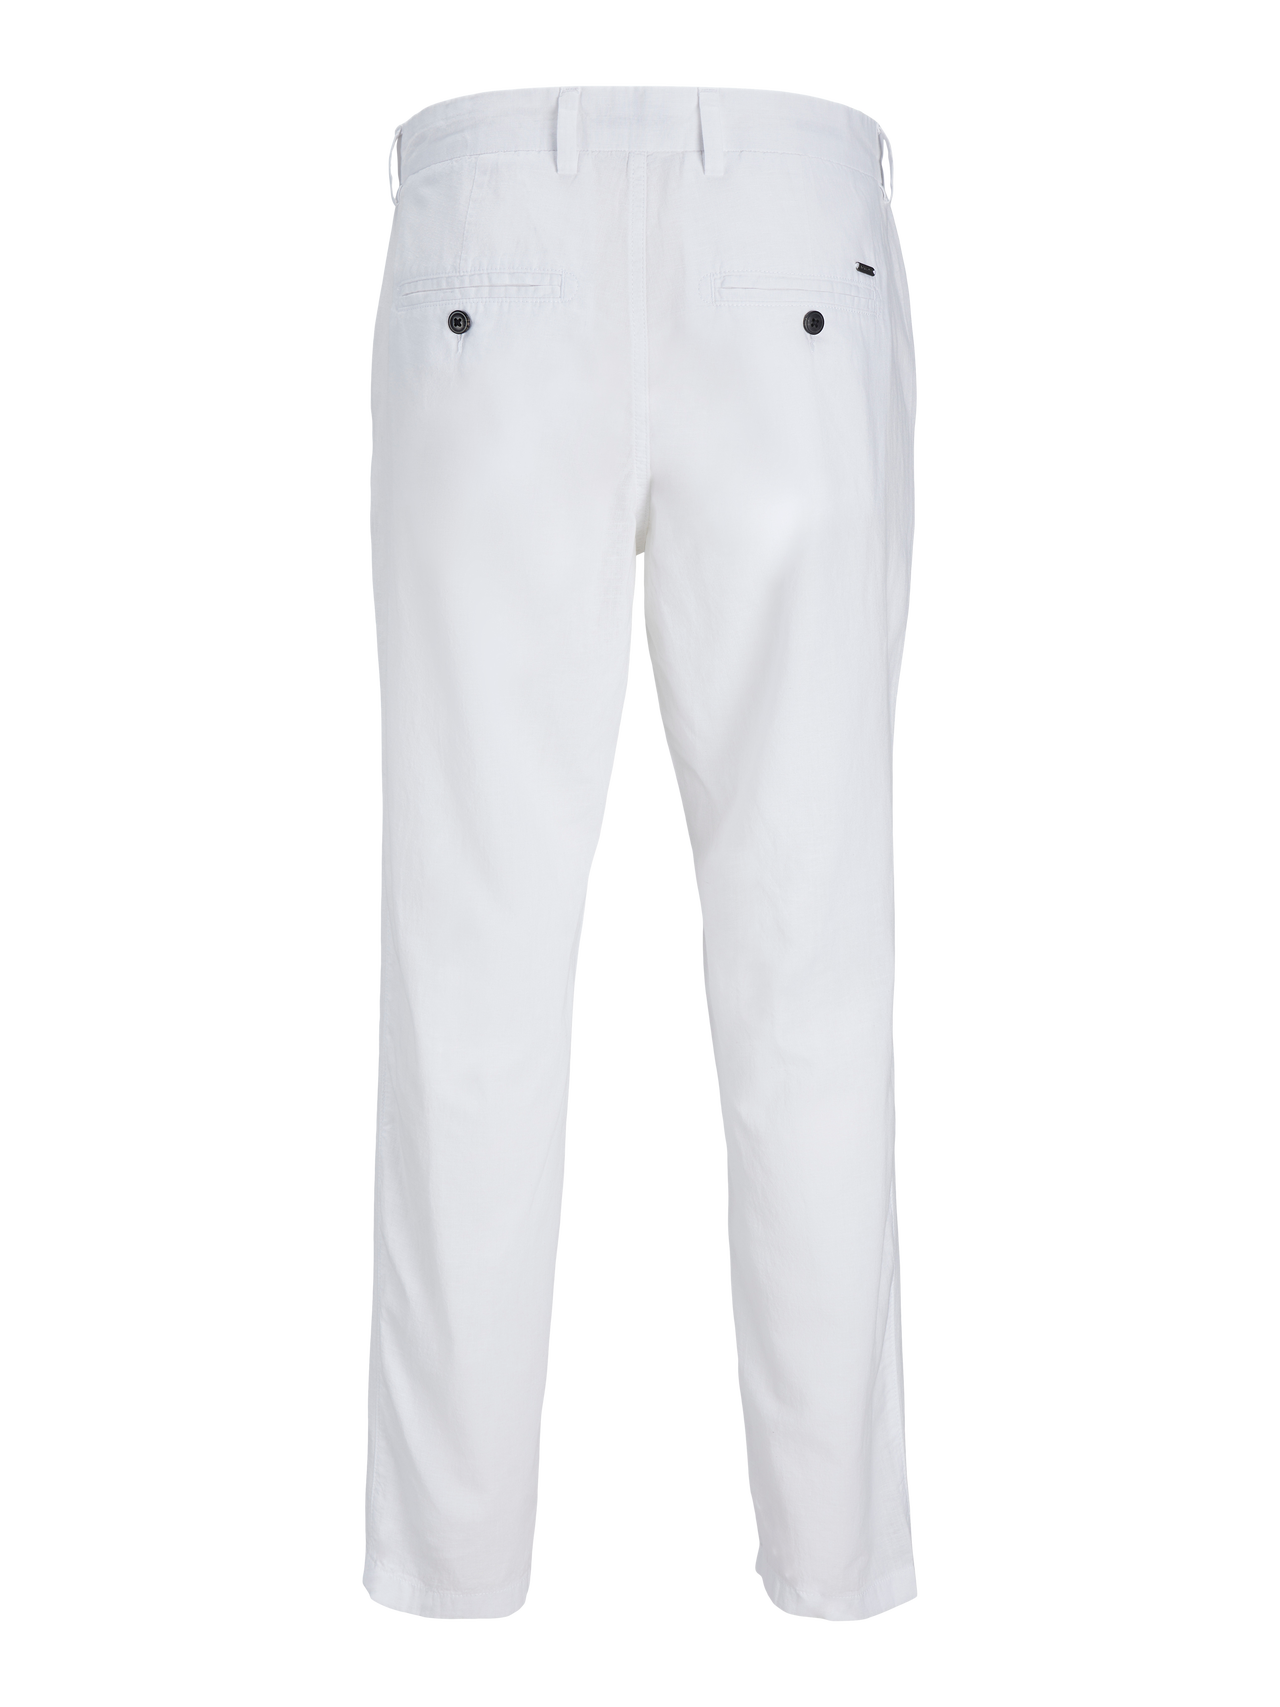 Jack & Jones Plus Size Tapered Fit Carrot fit trousers -Bright White - 12259702